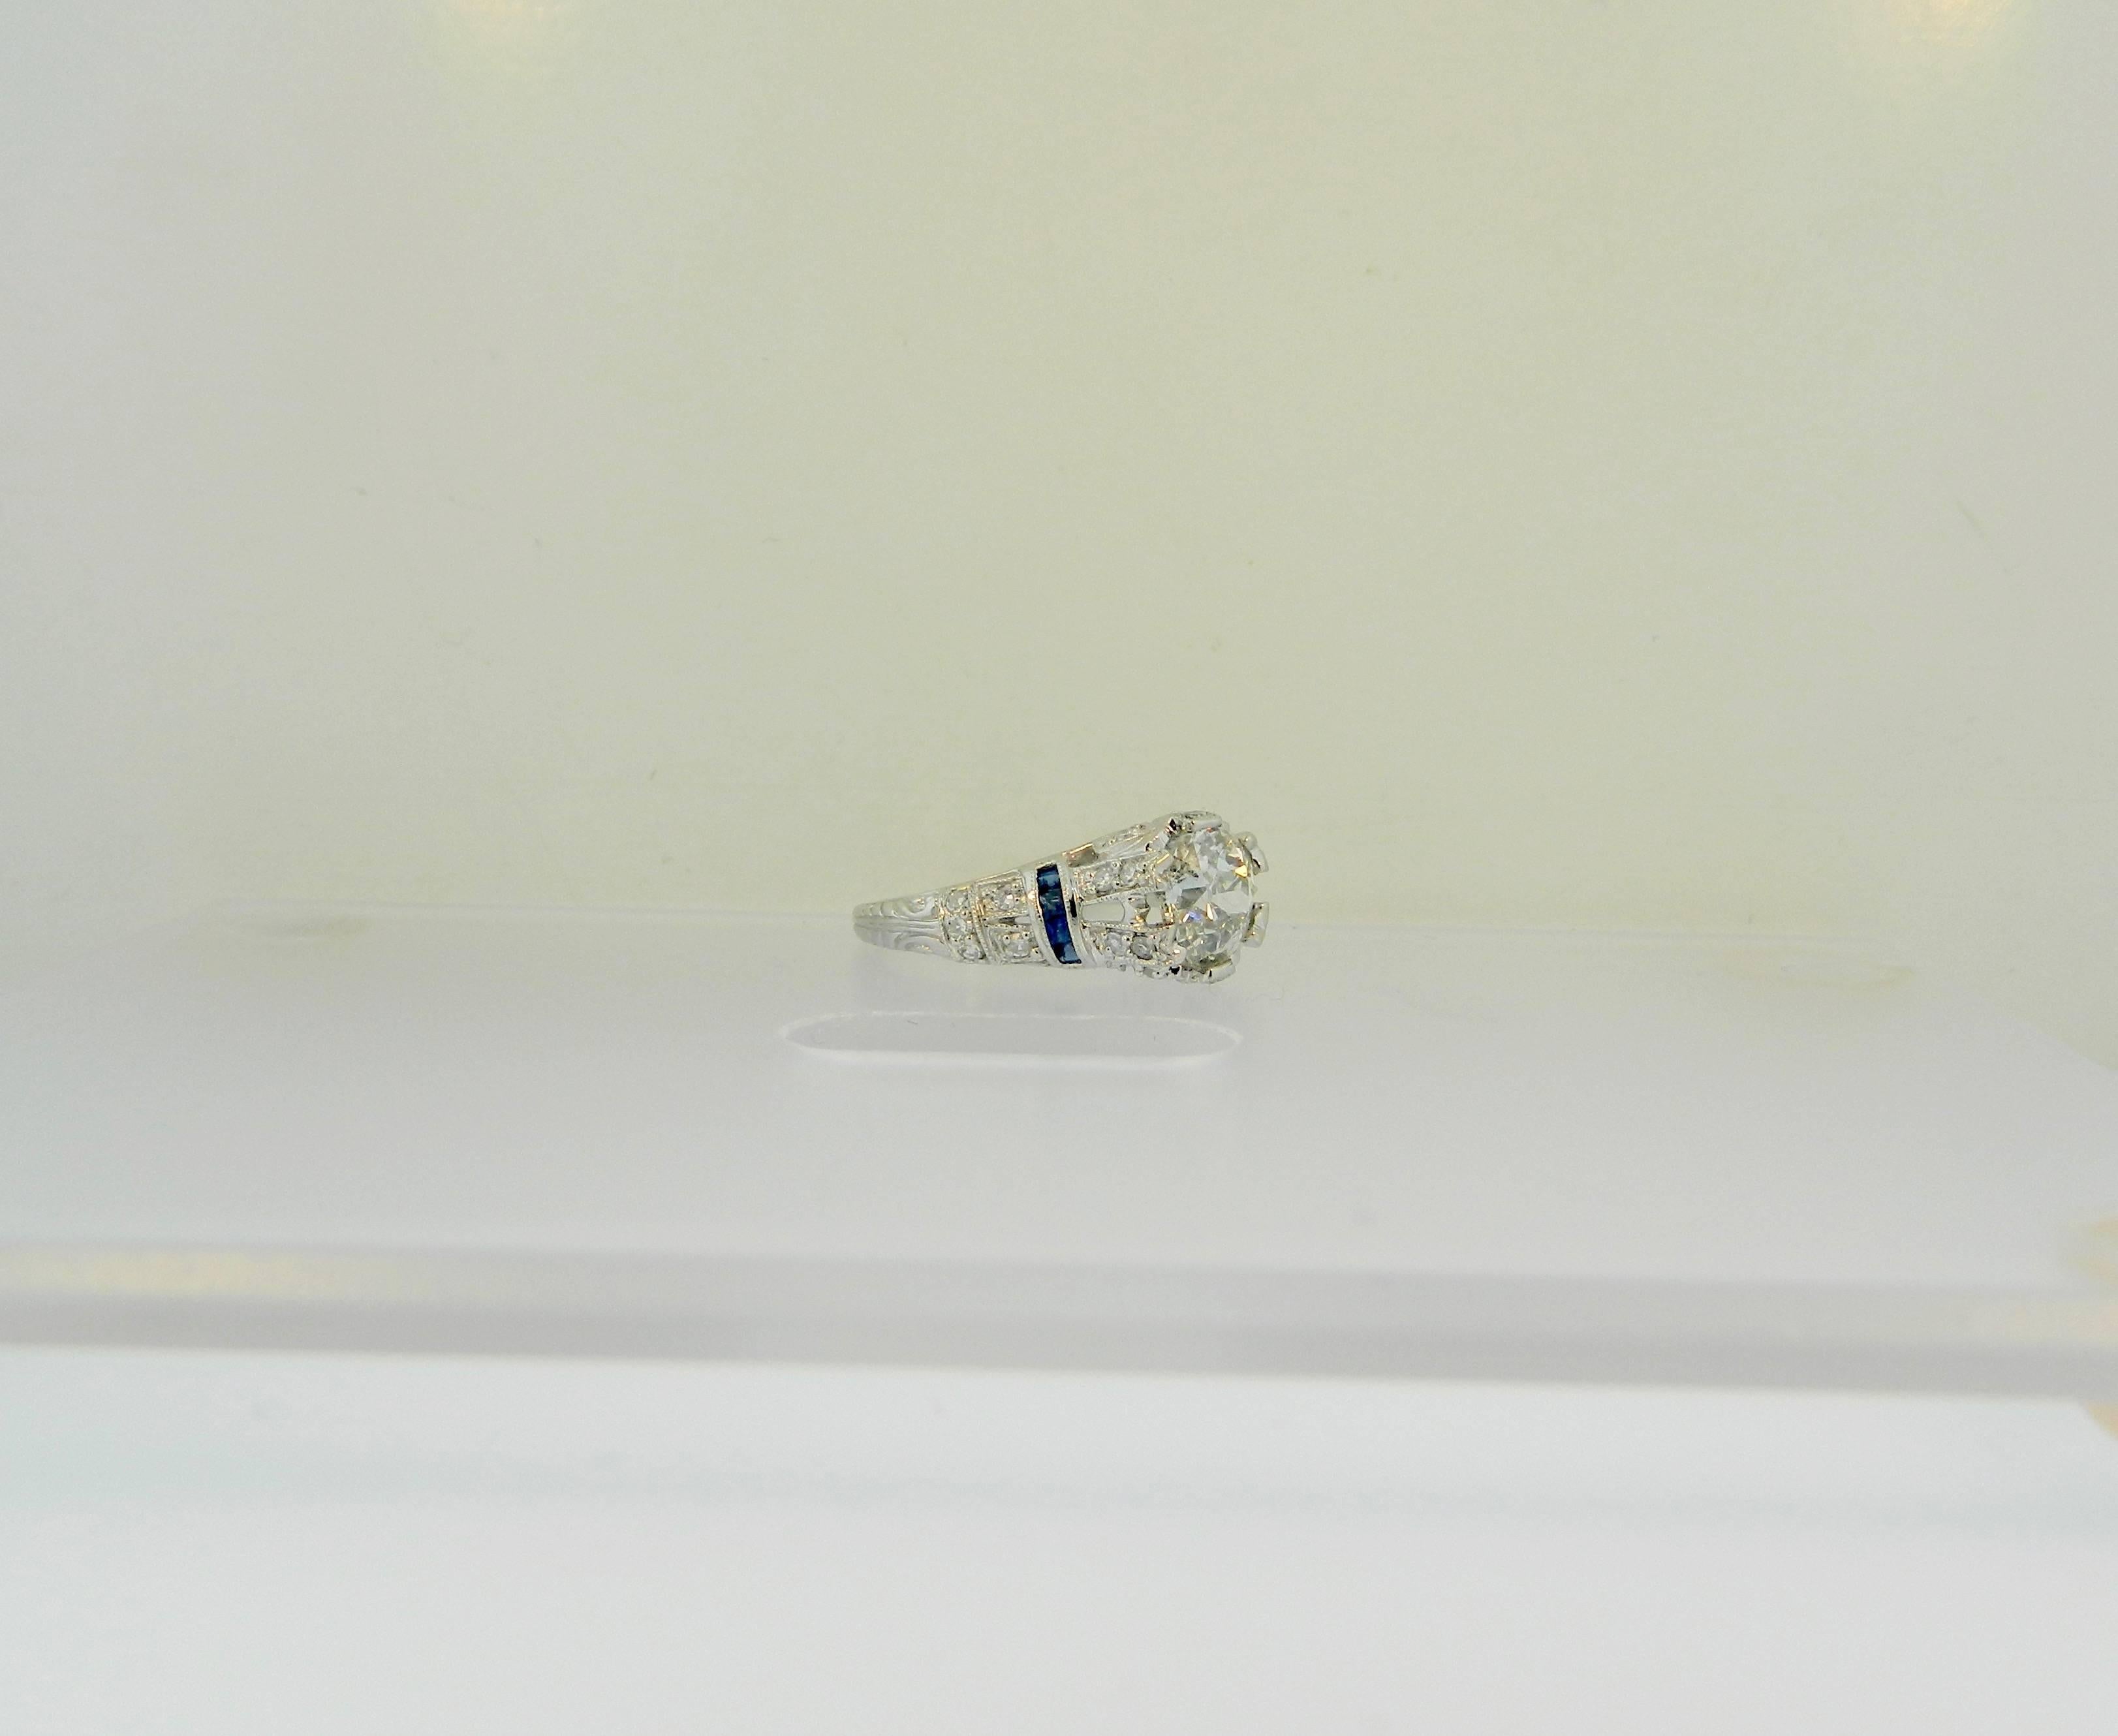 A wonderful Art Deco style, platinum, diamond and sapphire engagement ring.  The center diamond is a 1.38ct, I-J Color SI2 Clarity, antique Old Mine Cut diamond.